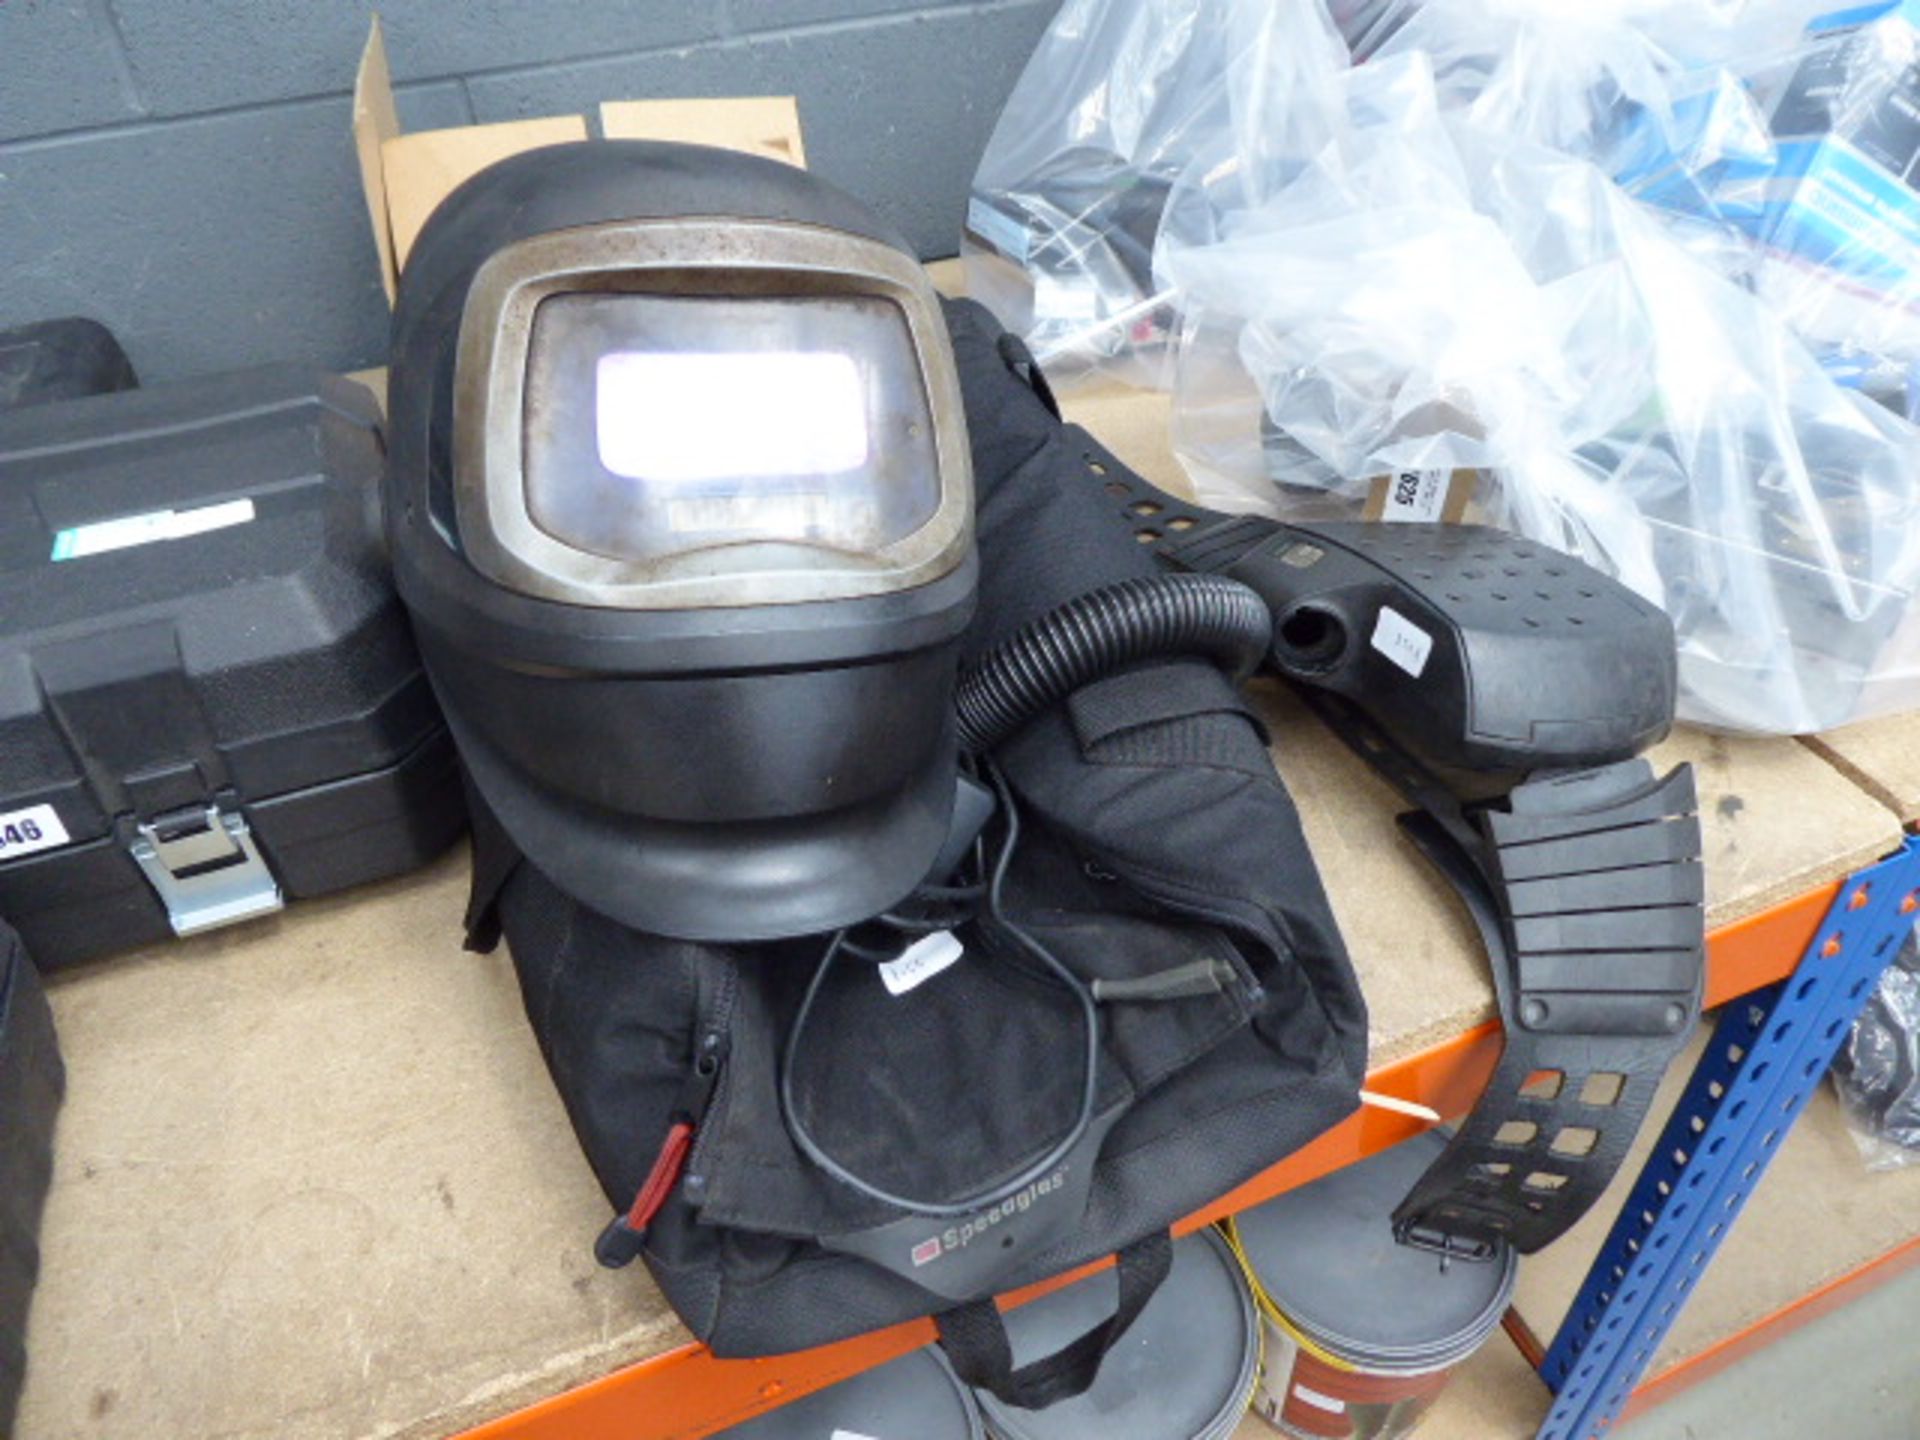 3m Speed Glass 9100 FX air welders mask and carry case